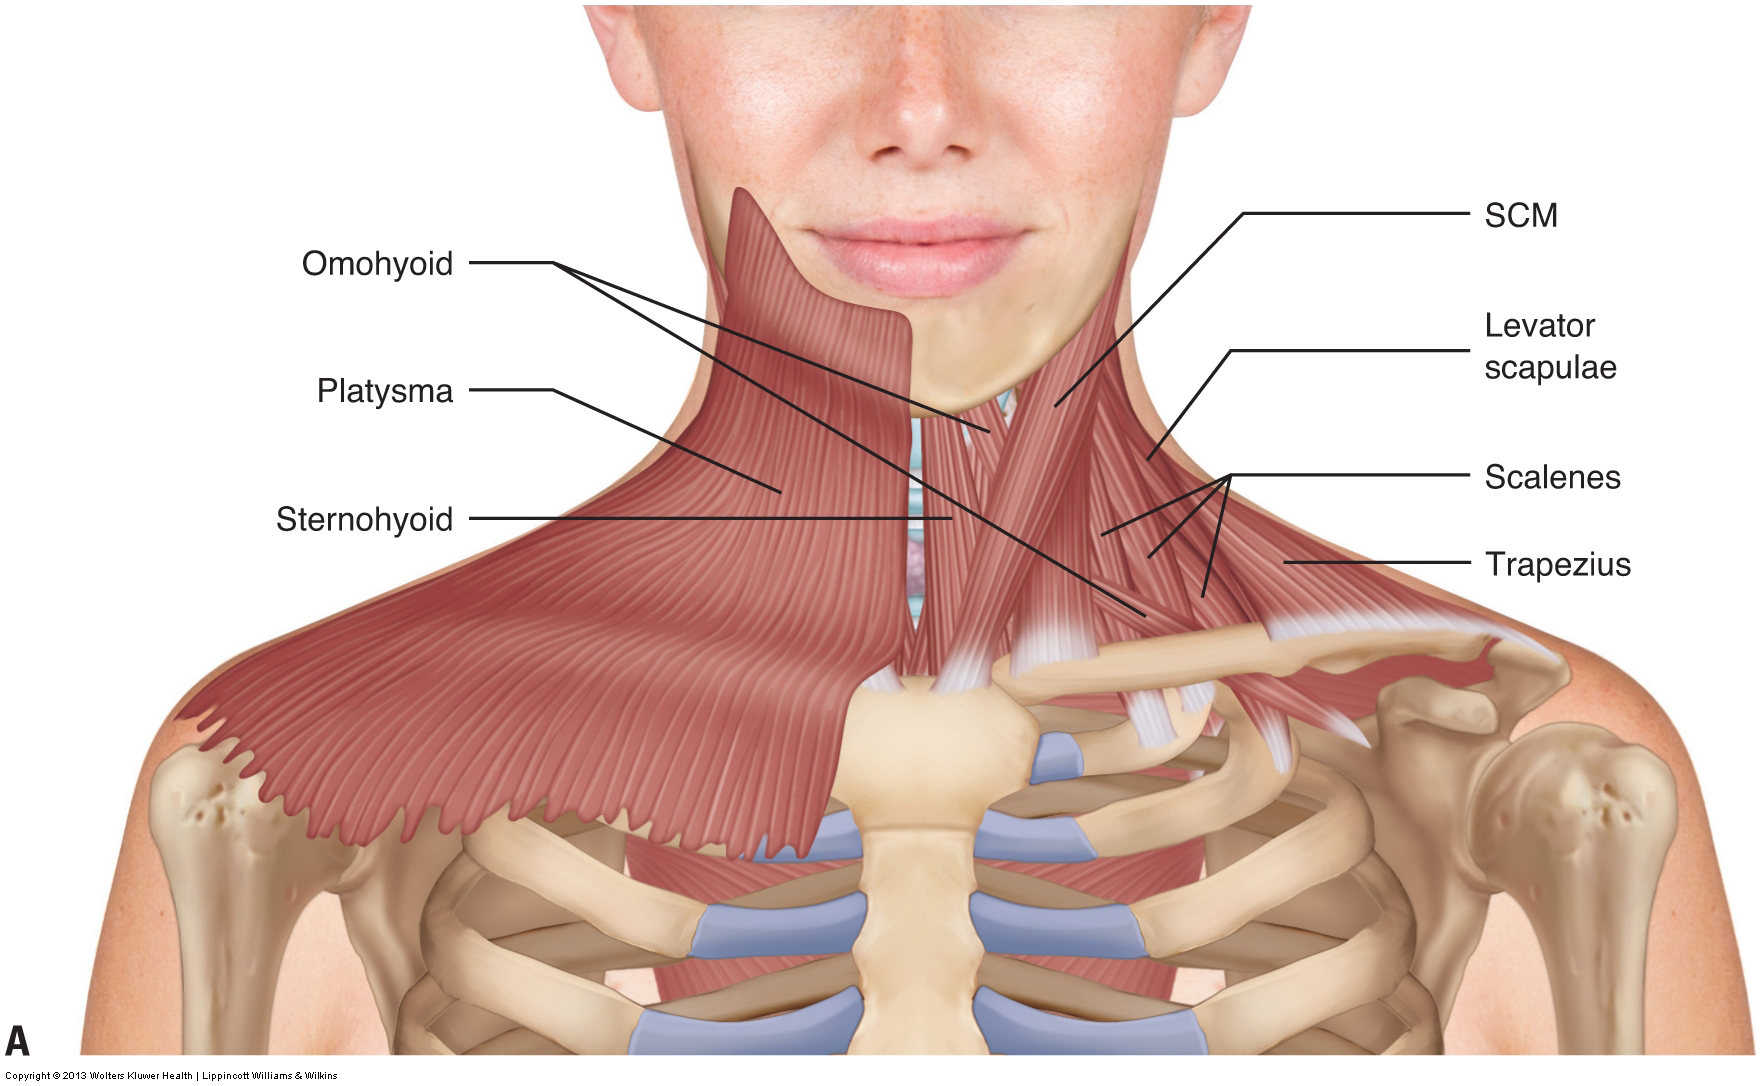 Muscles Of The Neck Musculature Of The Cervical Spine